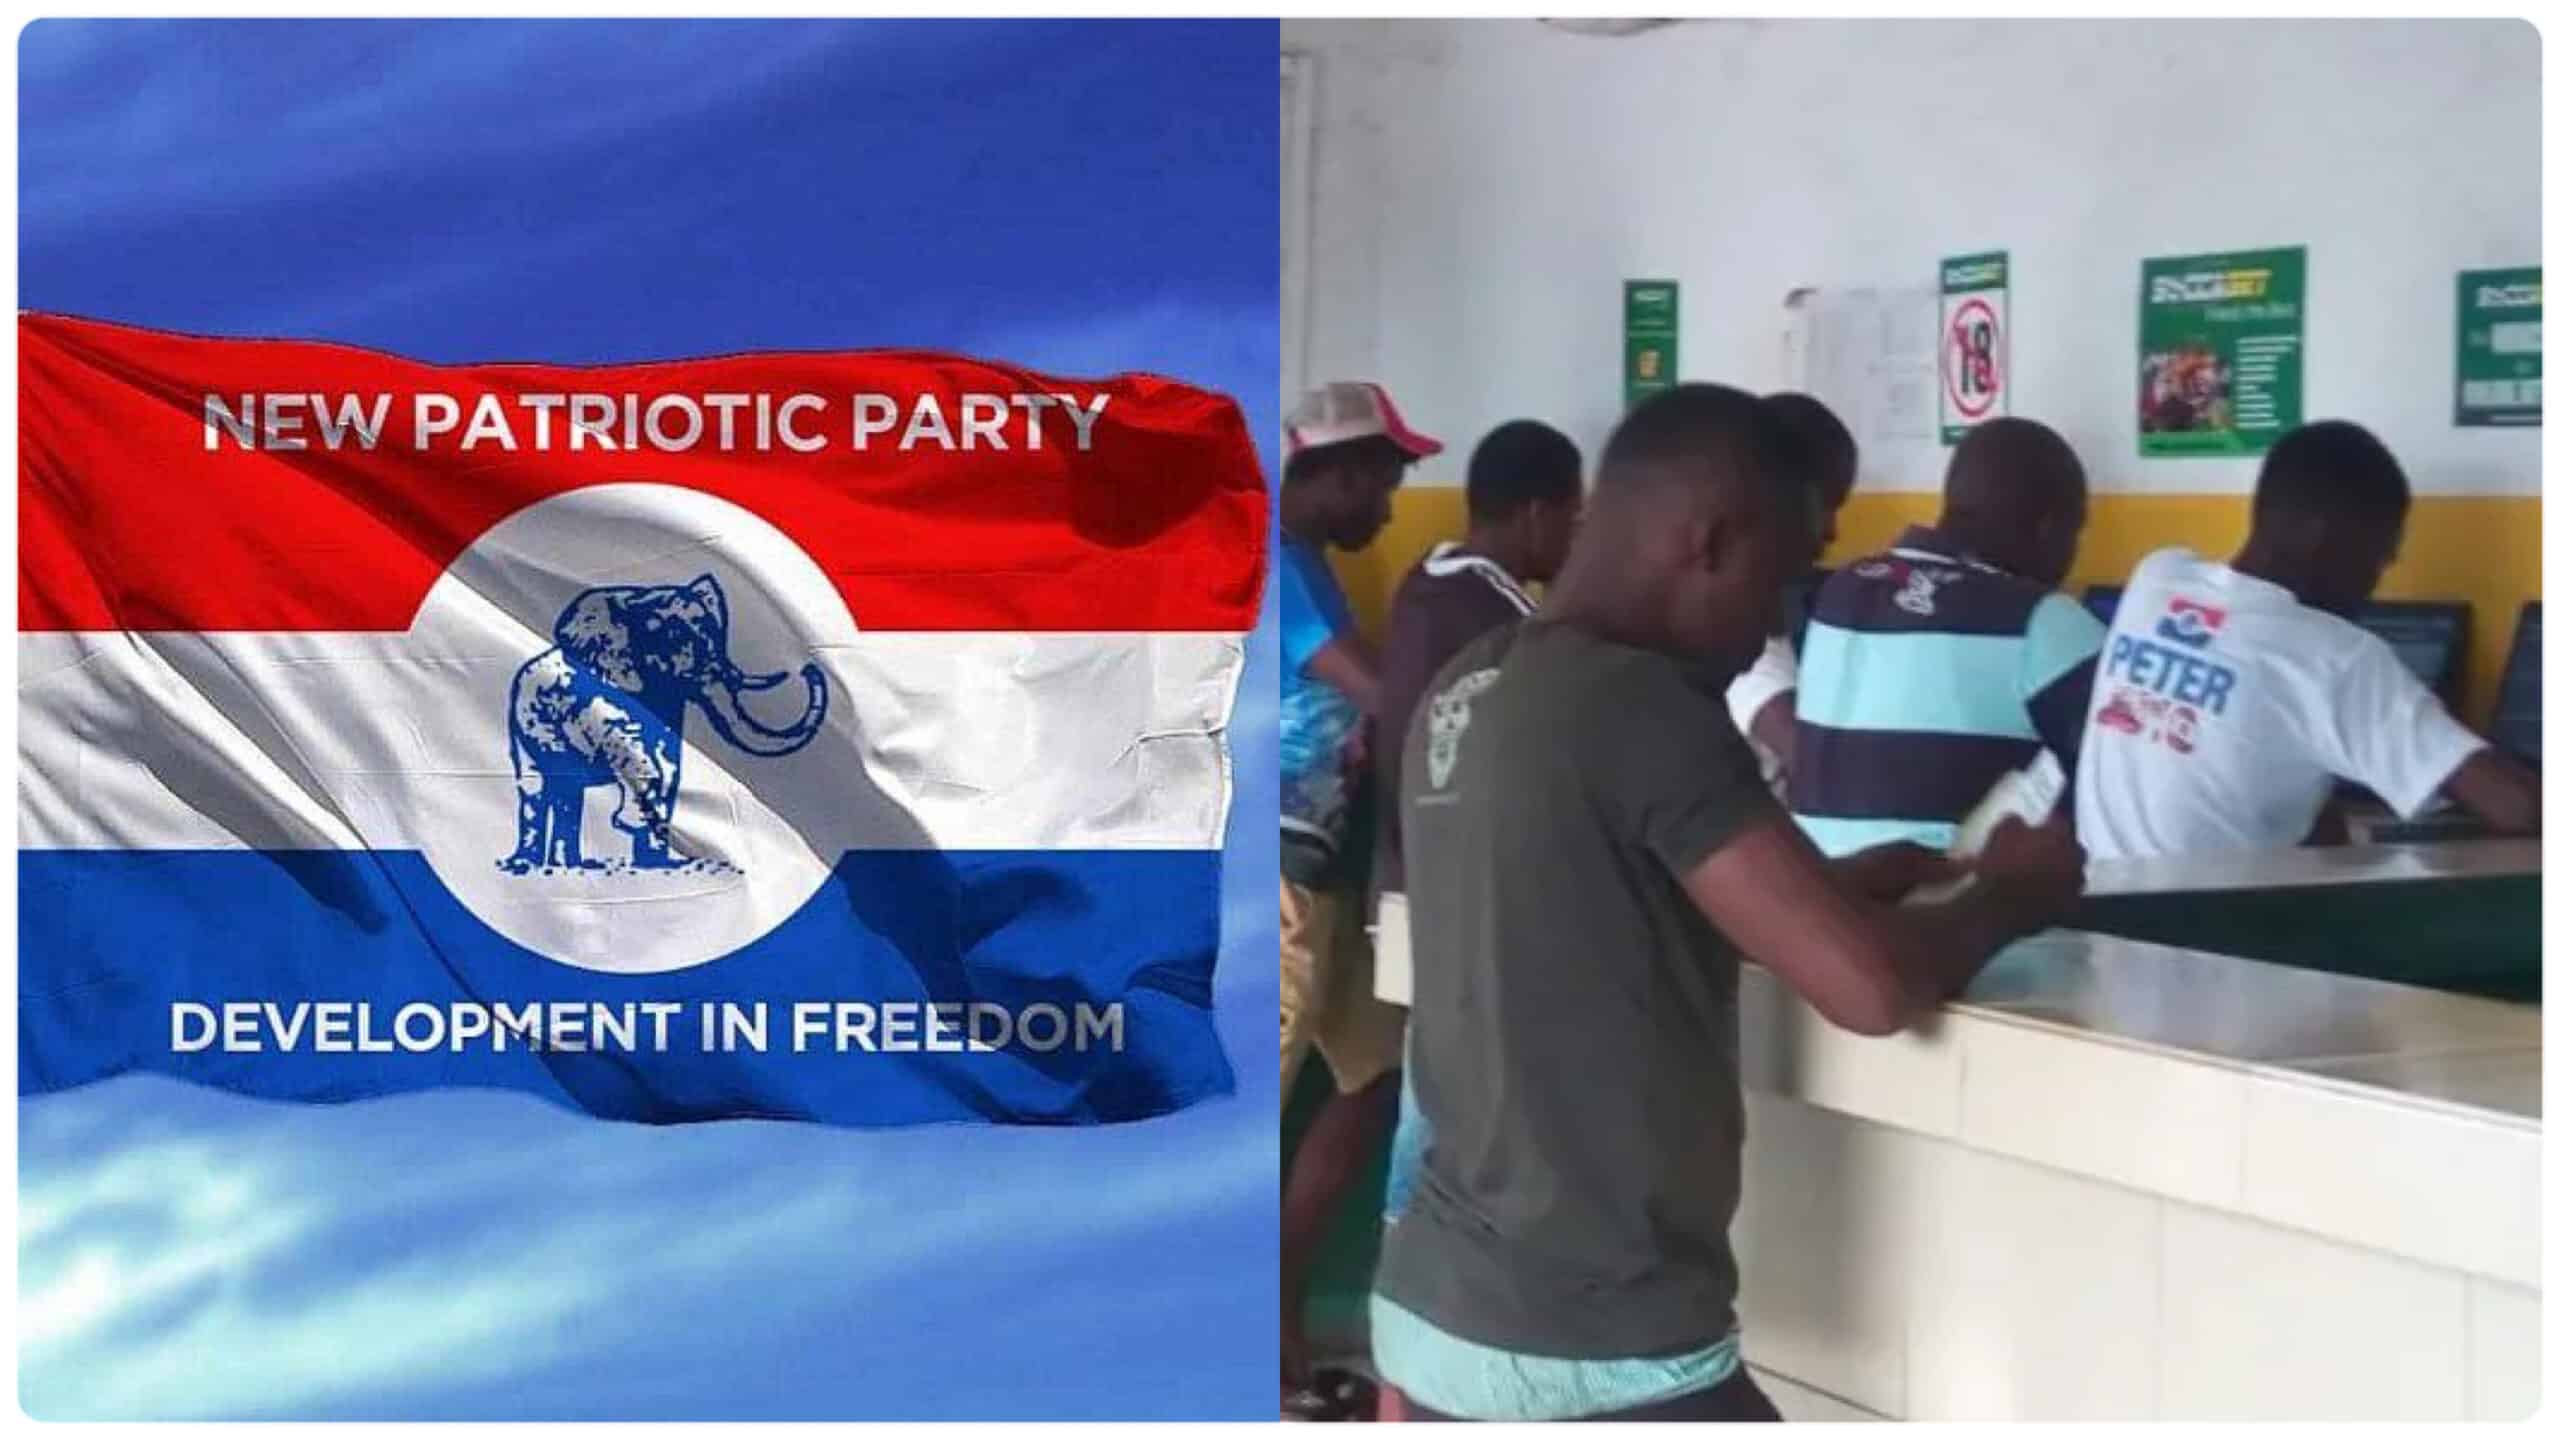 Betting is making the youth lazy, we’re taxing them so they can stop – NPP